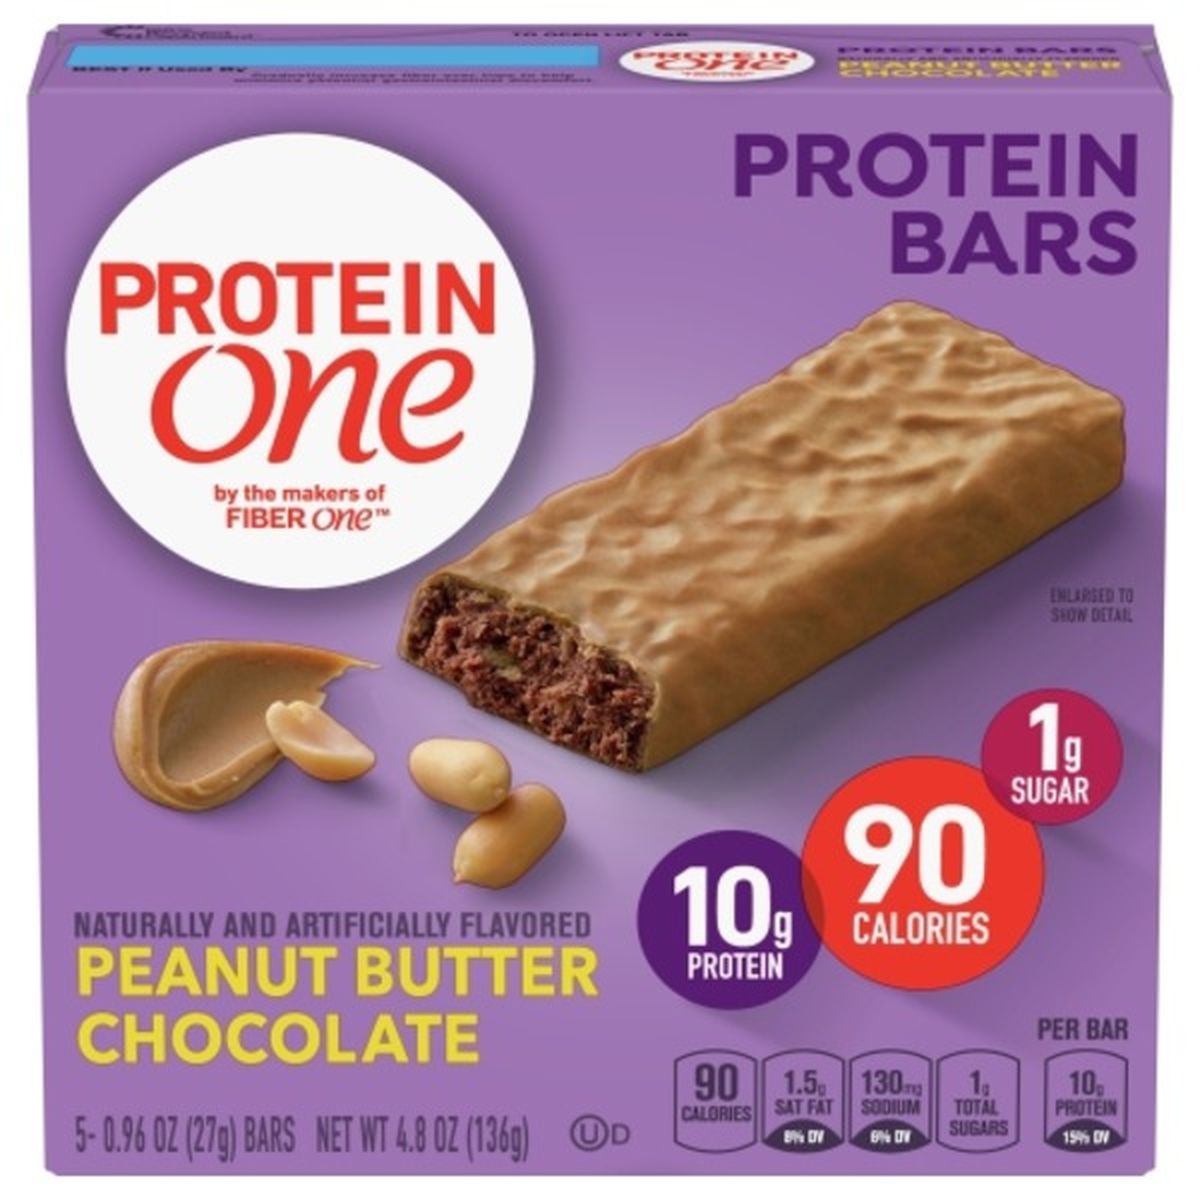 Calories in Protein One Protein Bars, Peanut Butter Chocolate